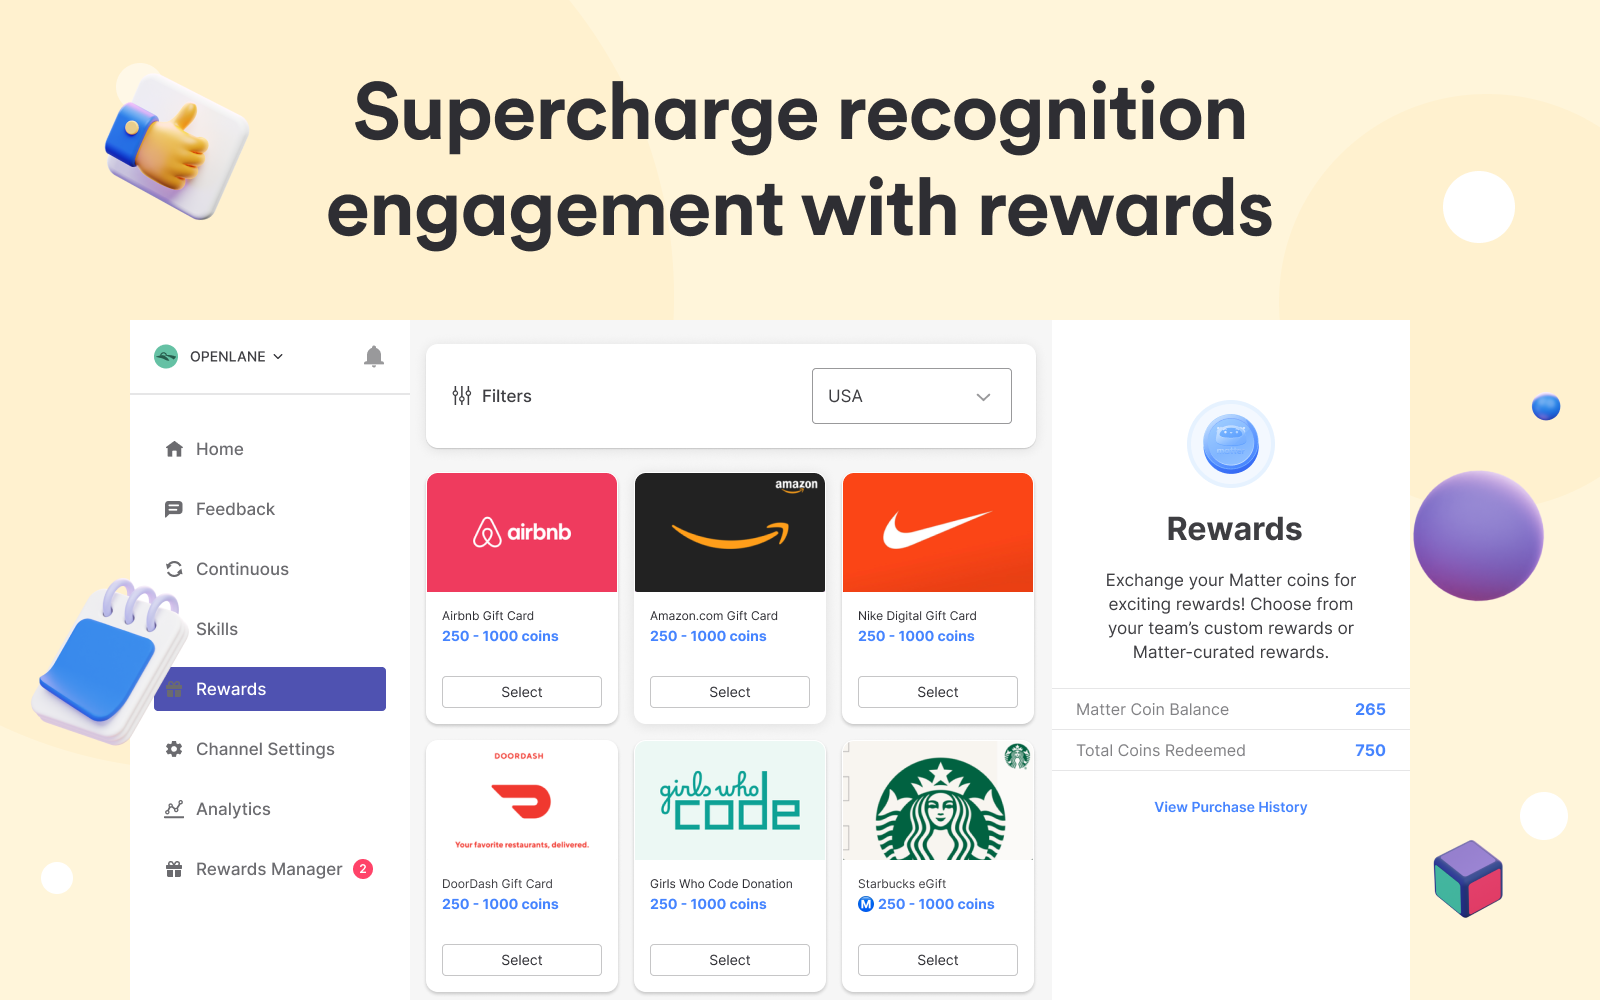 Increase recognition with Rewards! — Add Matter coins to kudos, surveys, and feedback to show extra appreciation. Redeem coins for gift cards, custom company rewards, donations, and more.